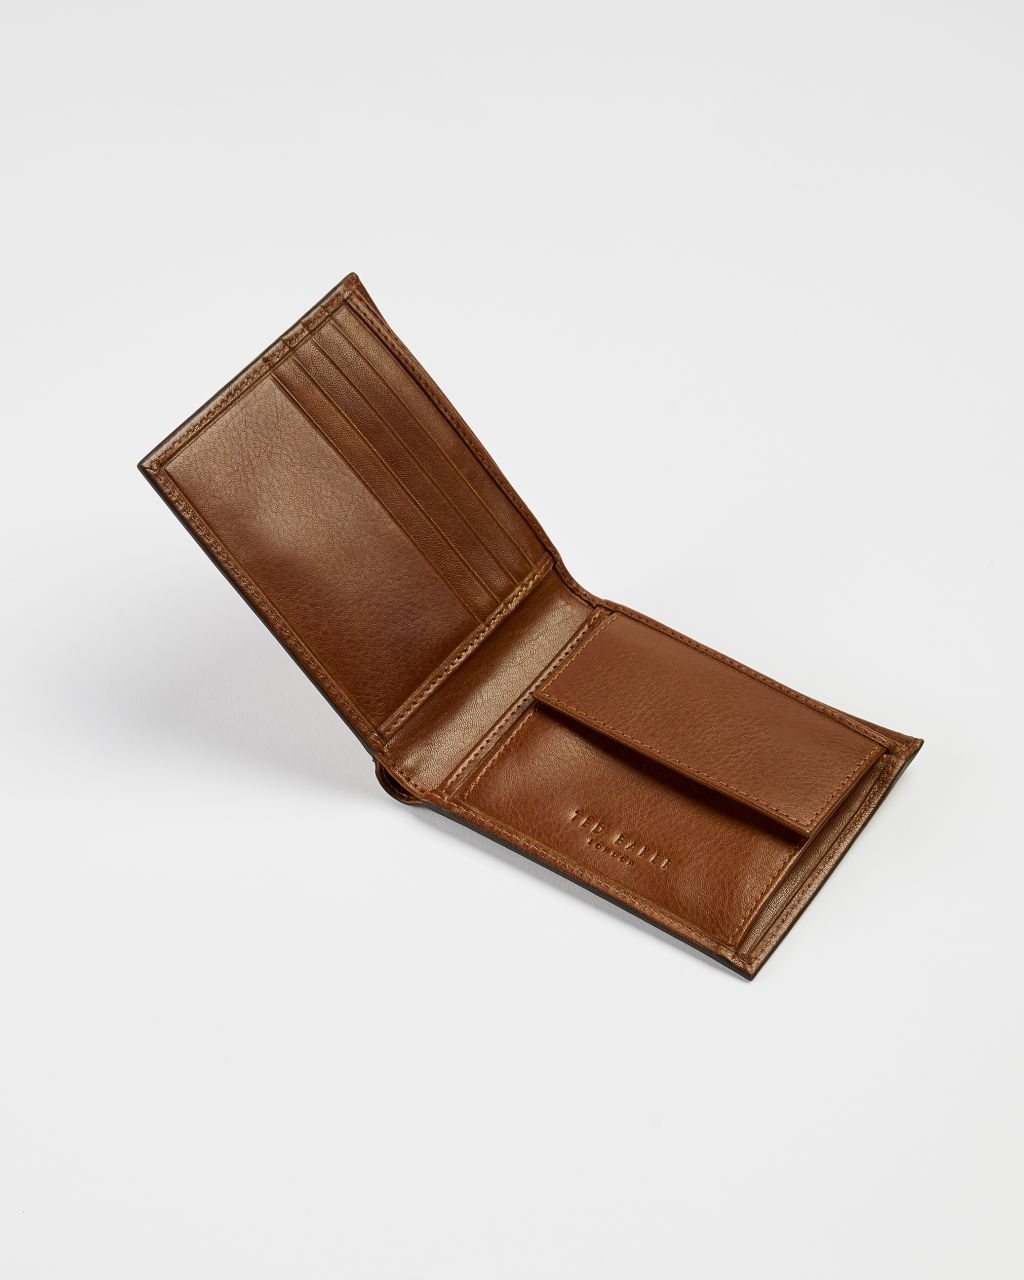 Artikel klicken und genauer betrachten! - A worthy investment, the PRUG wallet is a more stylish way to get spending. Made in leather, it comes with a coin pocket, great for storing loose change in. Ted Baker accessories collection, 100% Leather, Coin pocket, Suitable for cards, coins and notes, Ted Baker-branded, Dimensions: H 9.5cm x W 11cm x D 2cm | im Online Shop kaufen